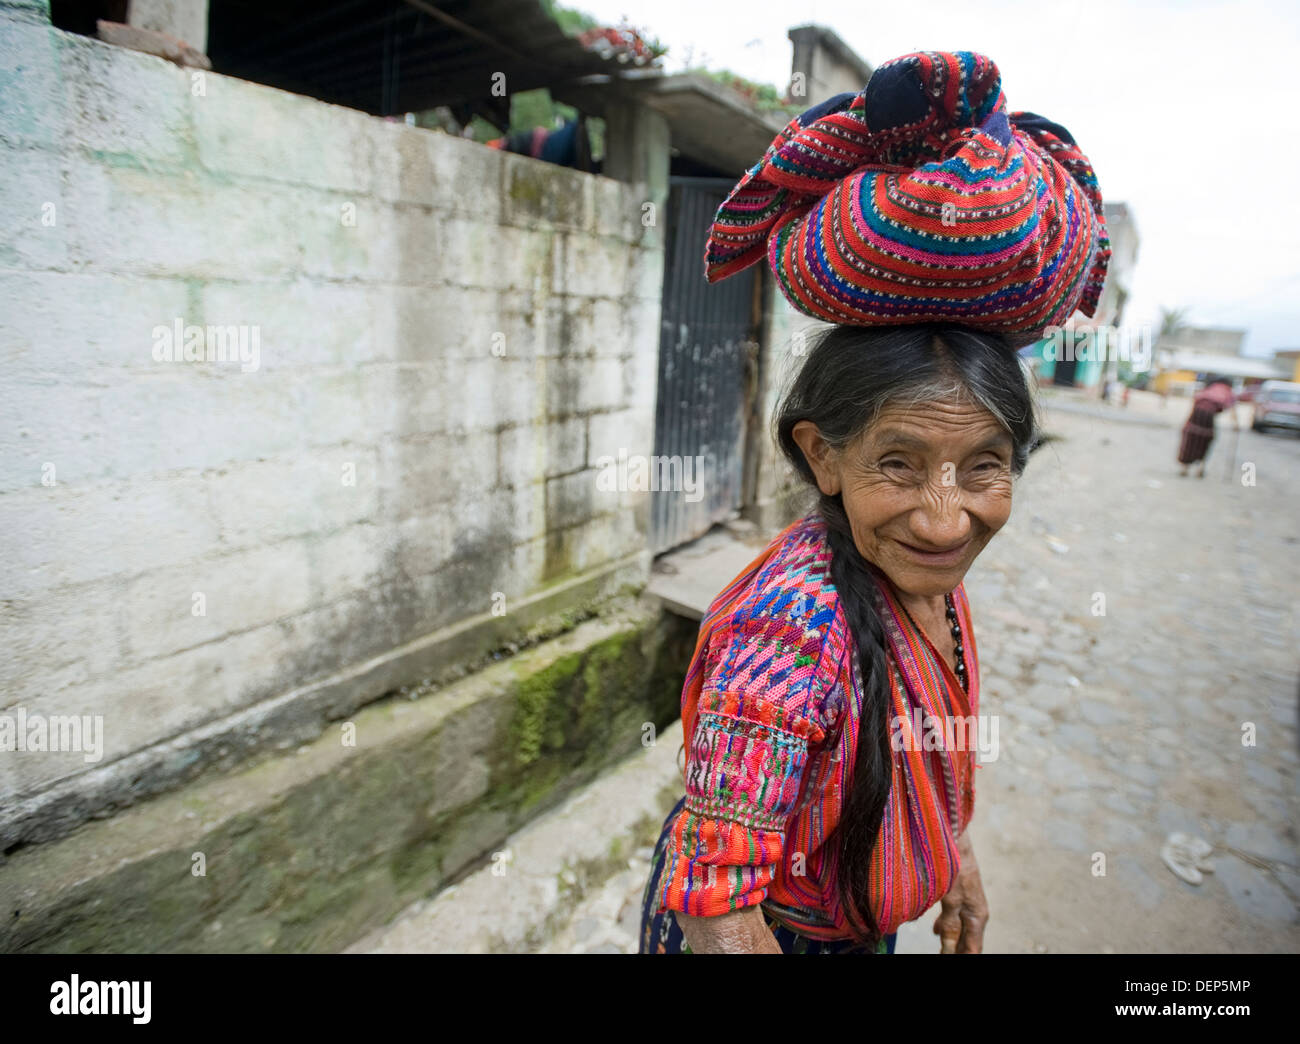 Guatemala indigenous woman of San Jorge in clothing called guipil (blouse) and corte (skirt) balancing bag on her head. Stock Photo